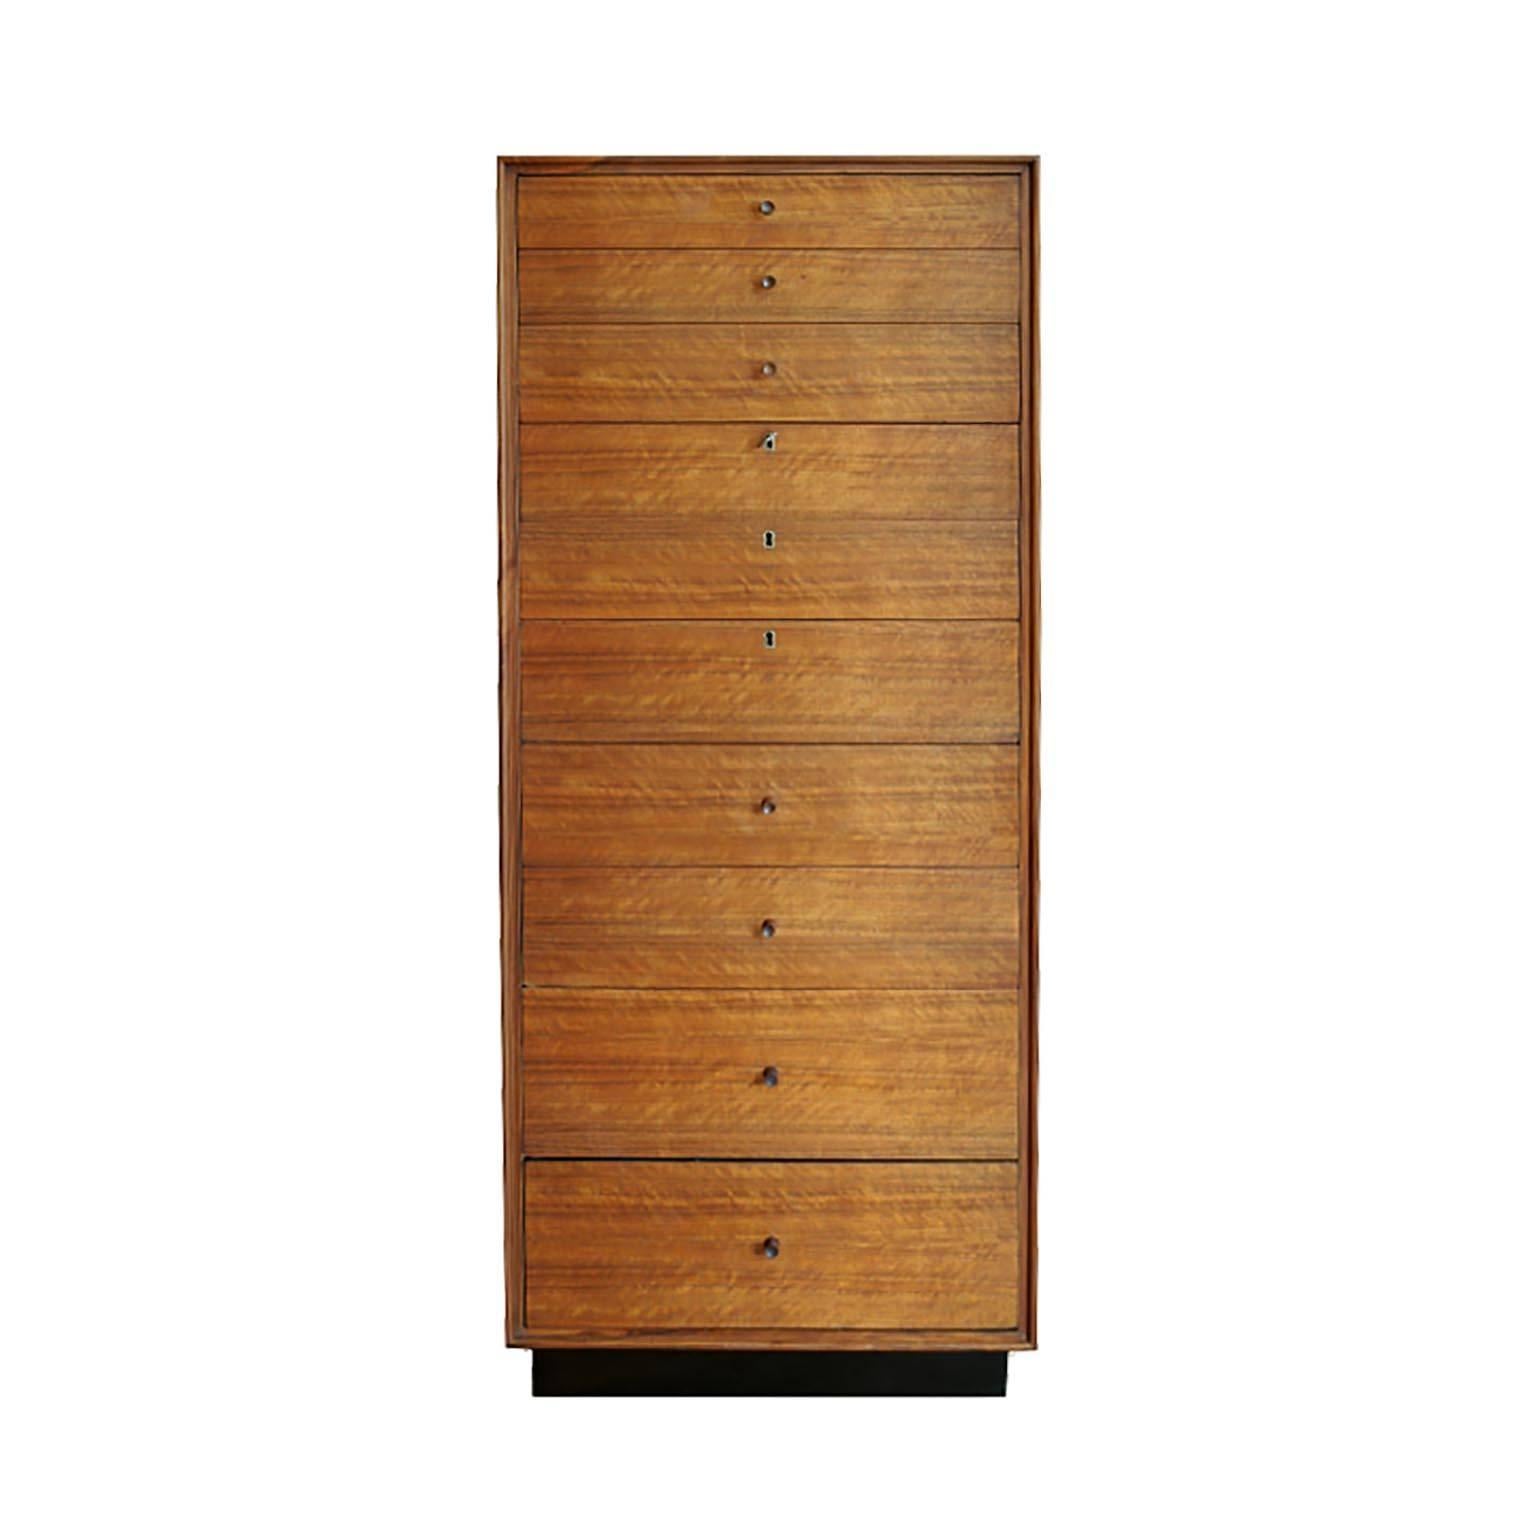 Chest of drawers with ten graduated drawers and original black plinth on the base. Three drawers are keyed with original key. Designed by Kipp Stewart and Stewart McDougall, circa 1950s.